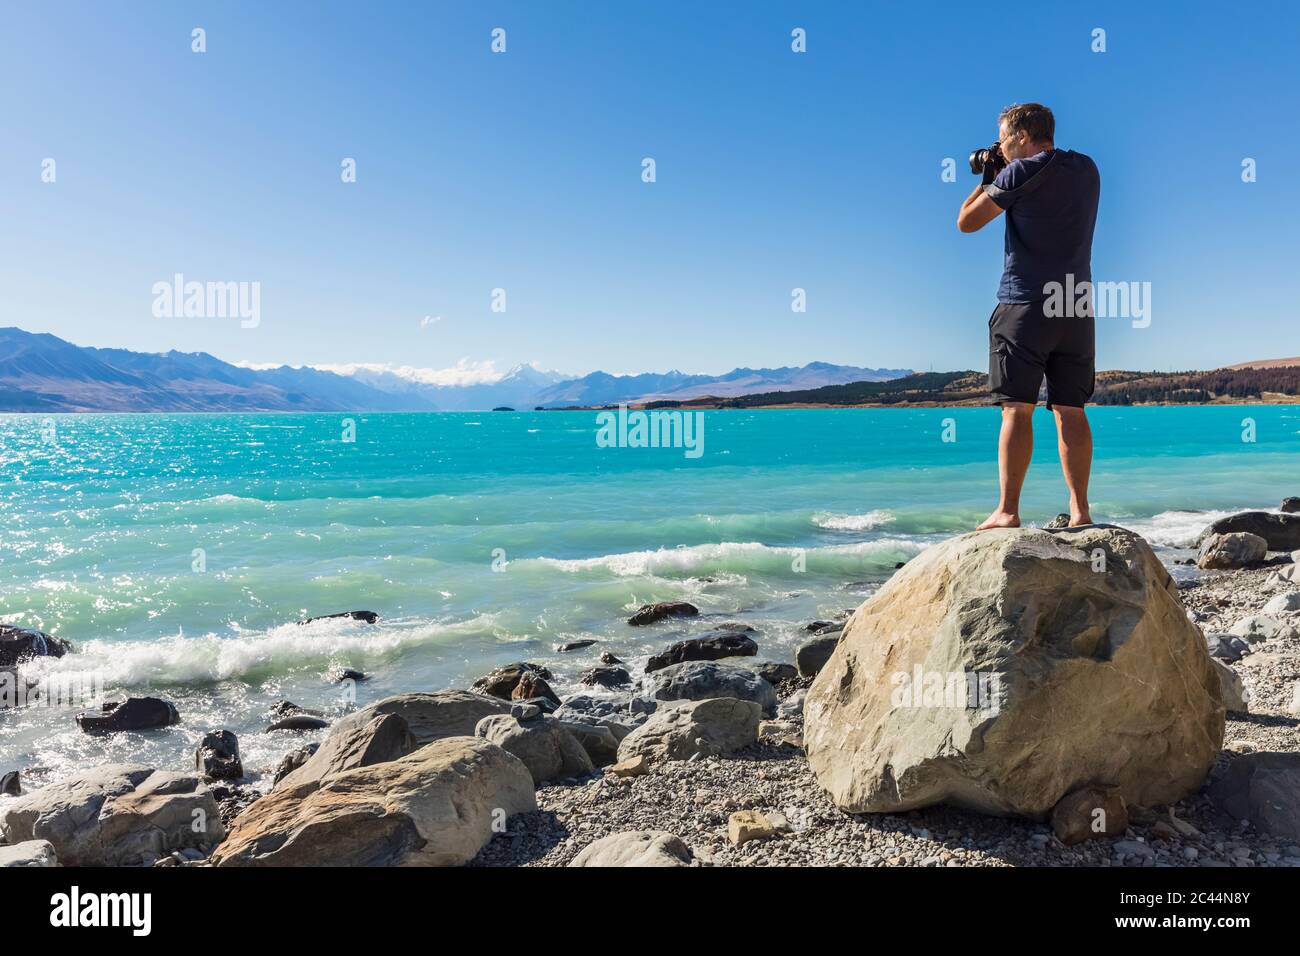 New Zealand, Oceania, South Island, Canterbury, Ben Ohau, Lake Pukaki and Southern Alps (New Zealand Alps) with Aoraki / Mount Cook, Man standing on boulder and photographing landscape Stock Photo